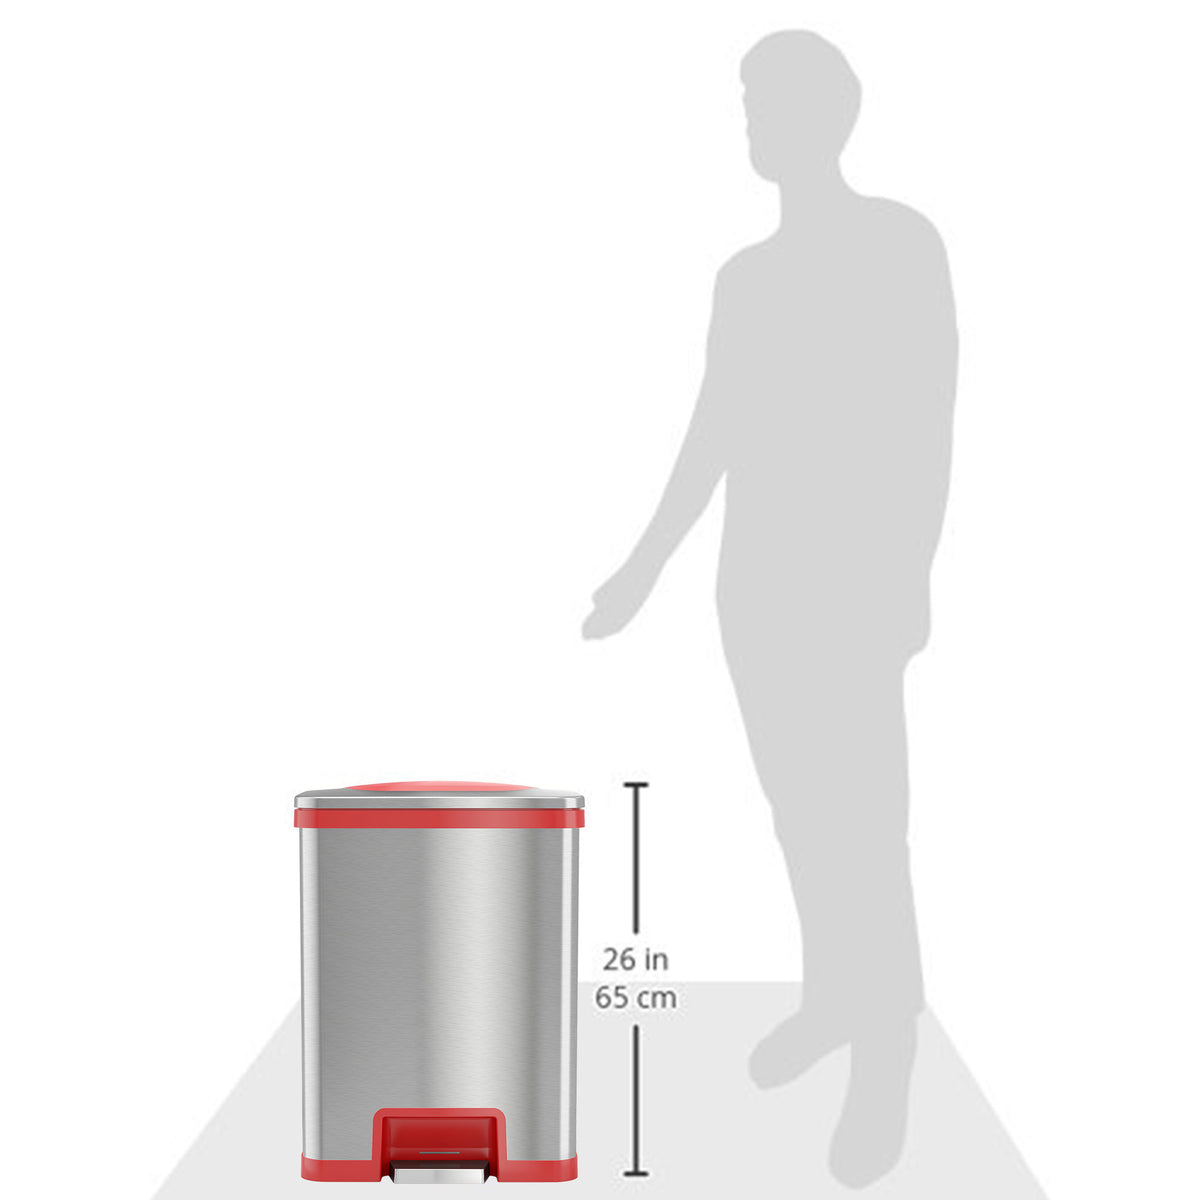 13 Gallon AutoStep Stainless Steel Pedal Sensor Trash Can (Red Trim) with Odor Filter dimensions